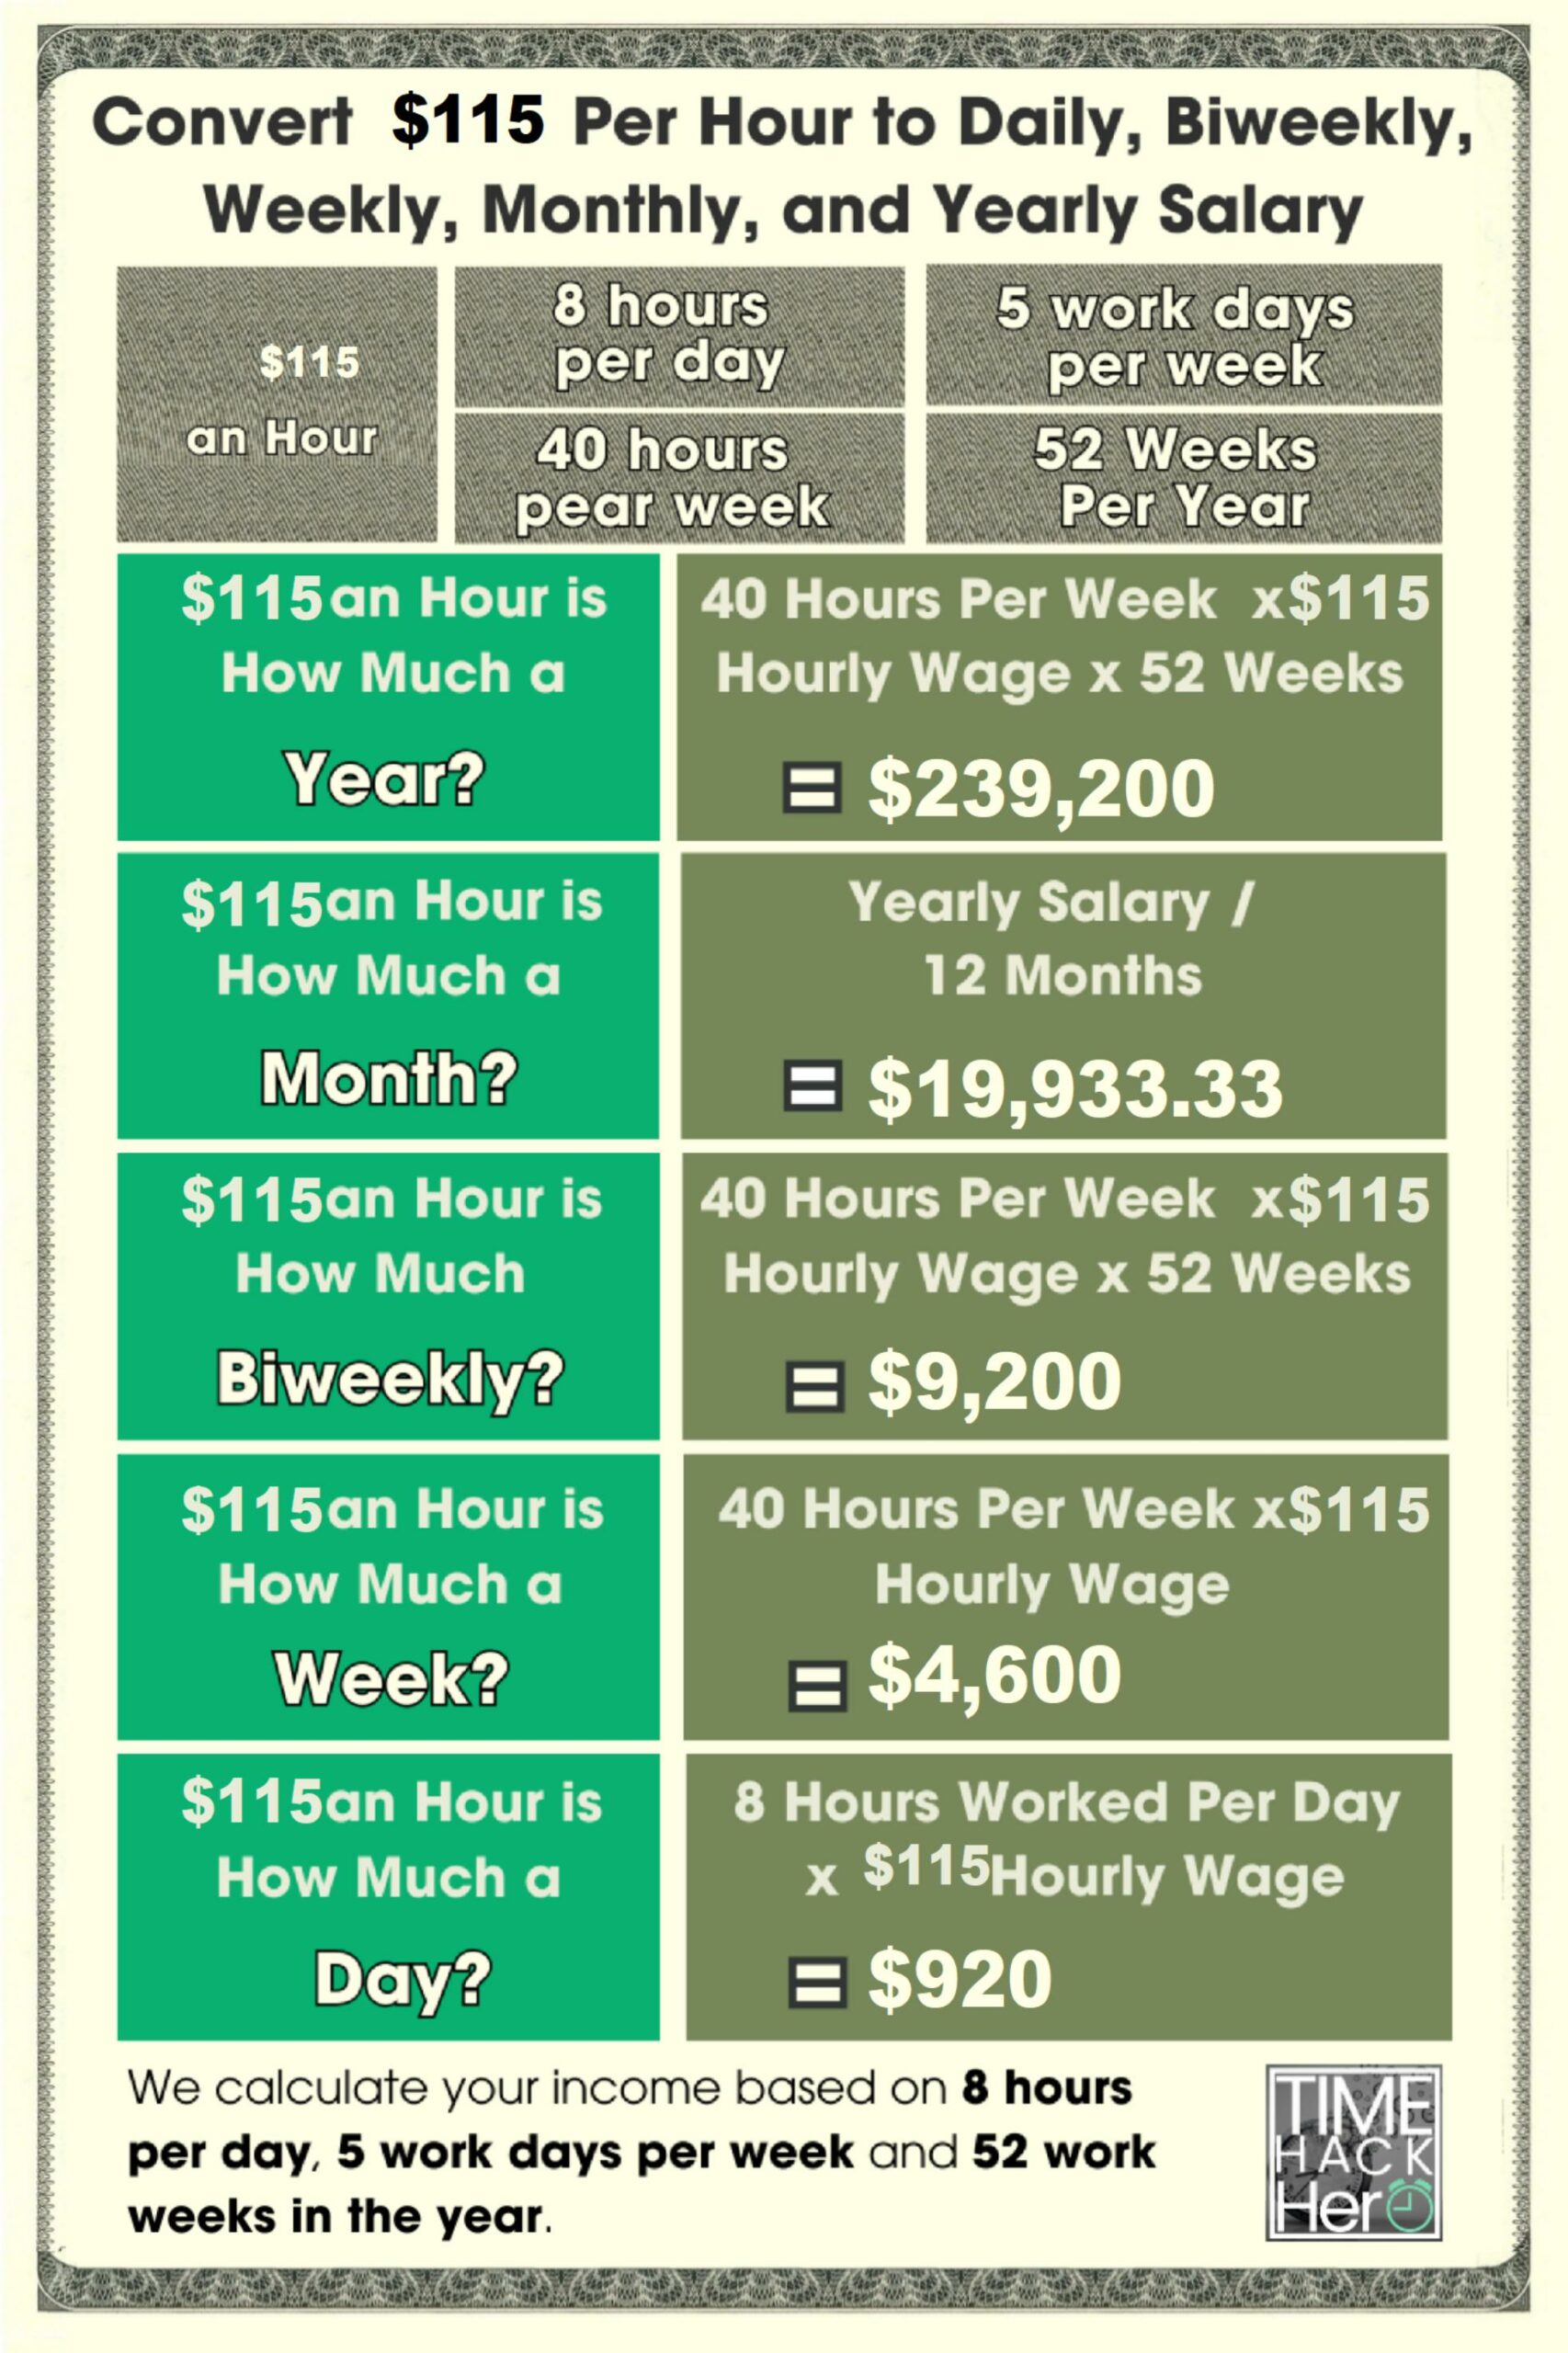 Convert $115 Per Hour to Weekly, Monthly, and Yearly Salary